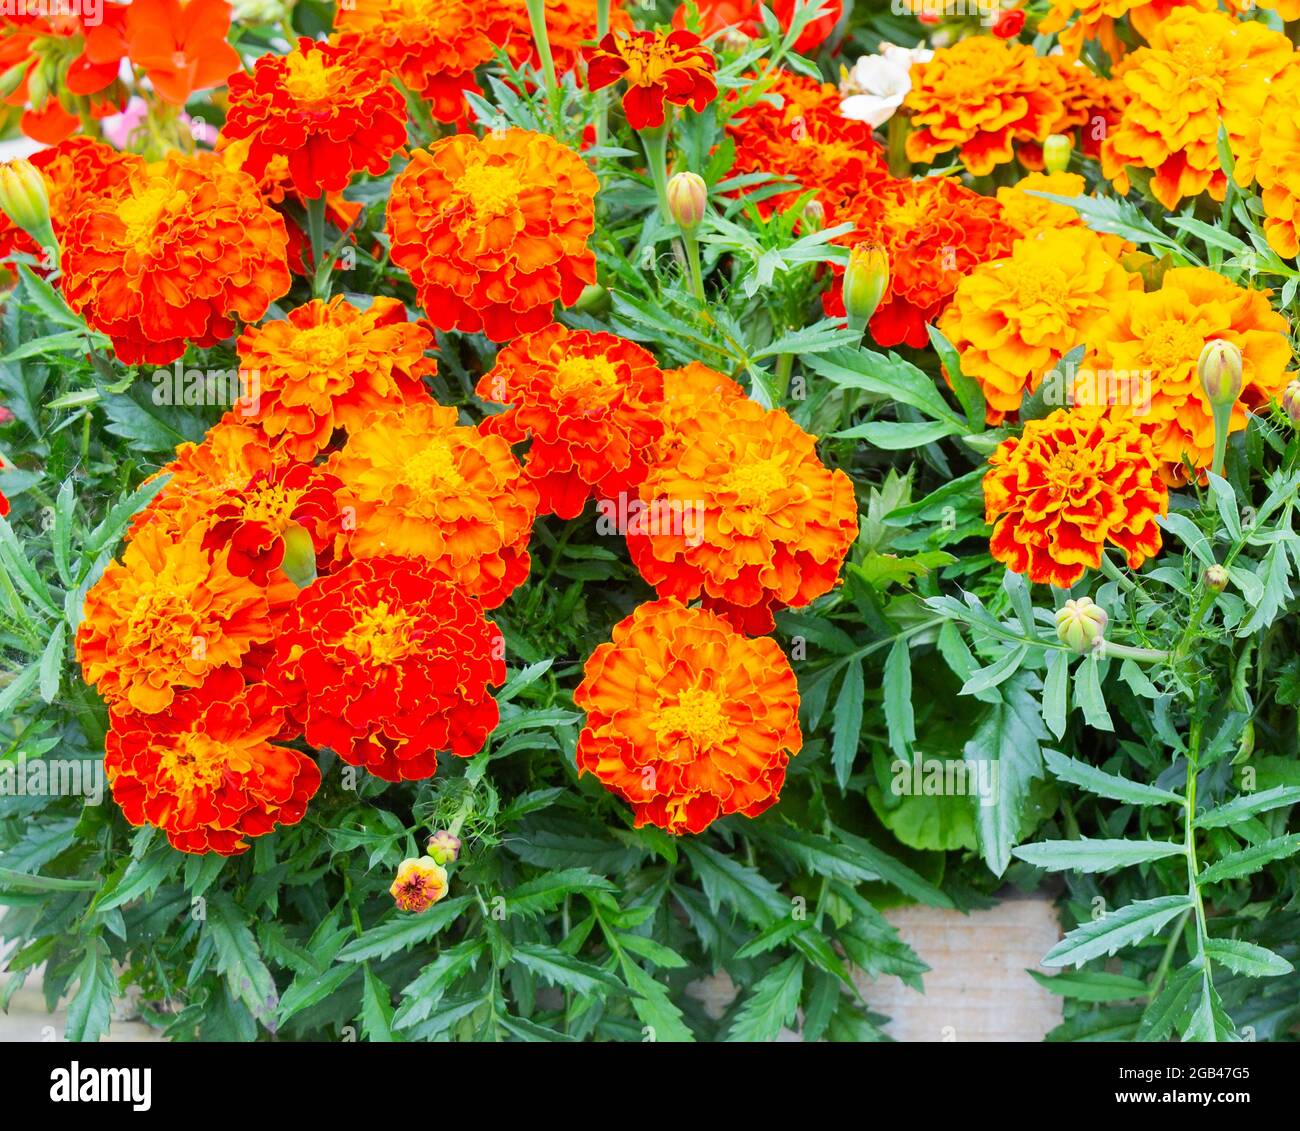 Indian Carnation Marigold summer bedding plant in full bloom Stock Photo